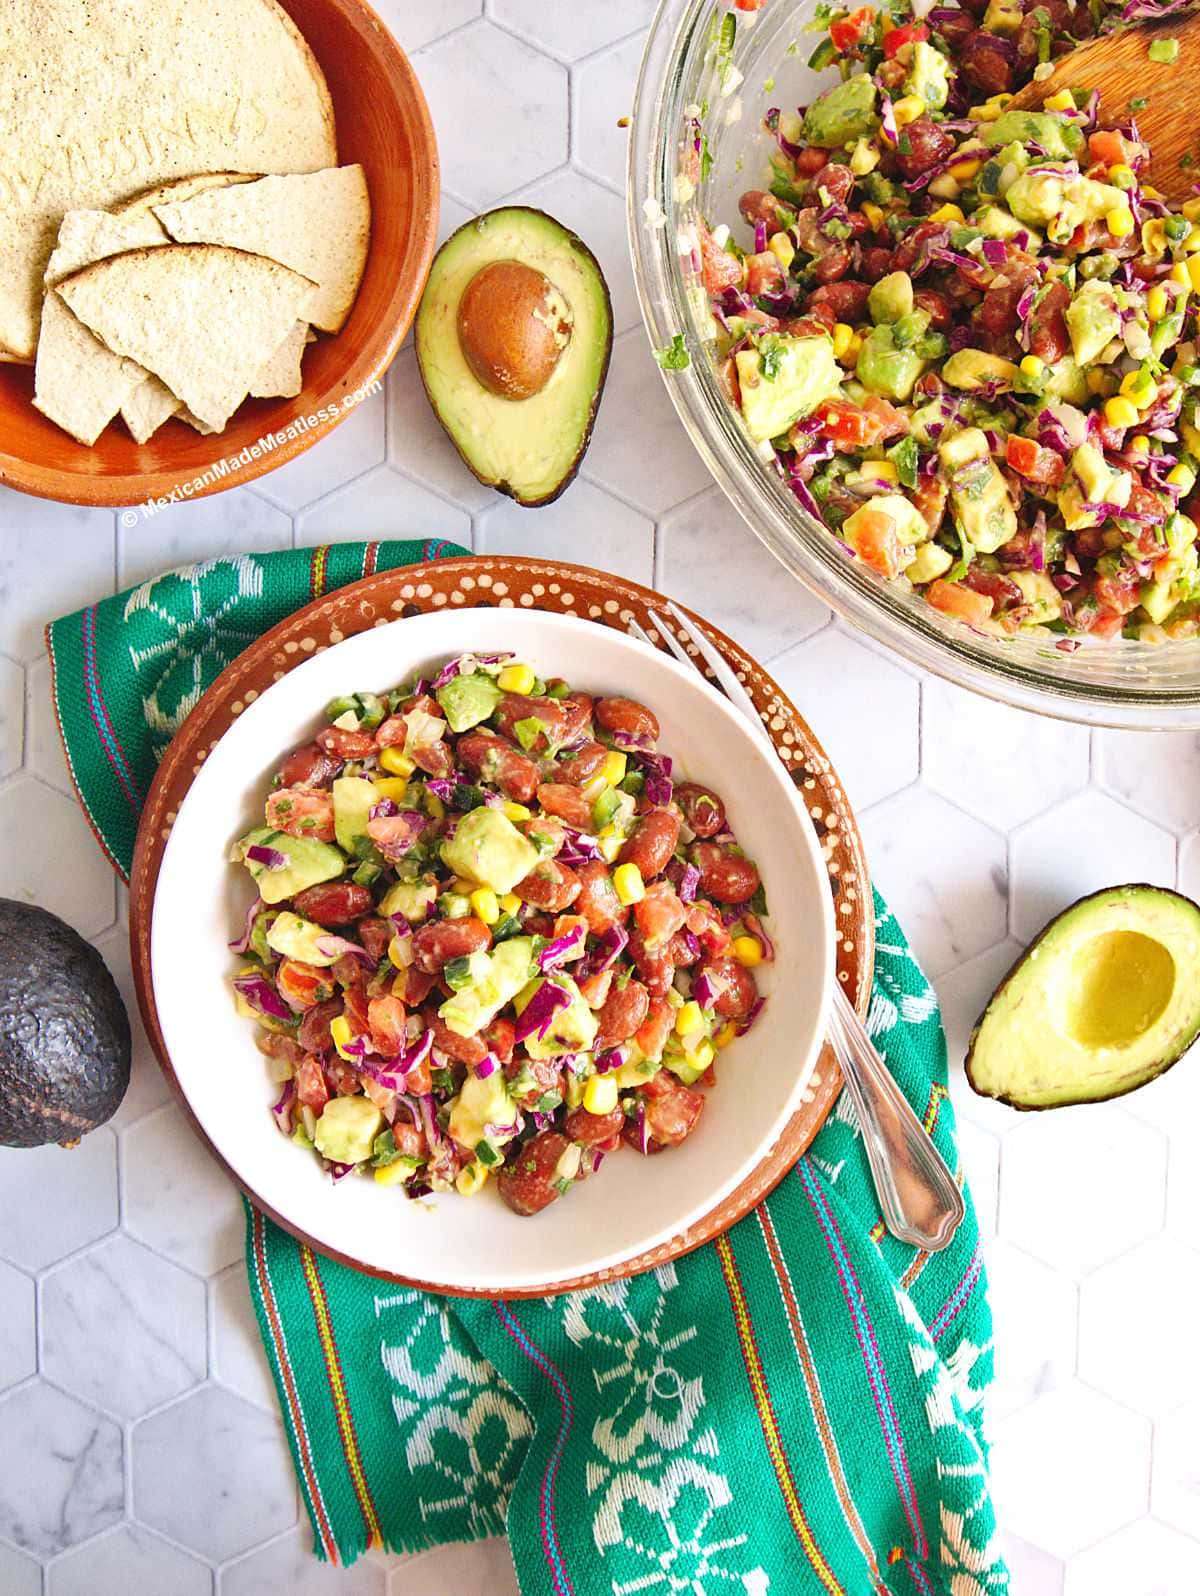 Small white bowl filled with bean and avocado salad, there's a small brown bowl filled with corn chips and tostadas, two avocado halves, one large glass mixing bowl filled with the salad all on top of white kitchen countertop.